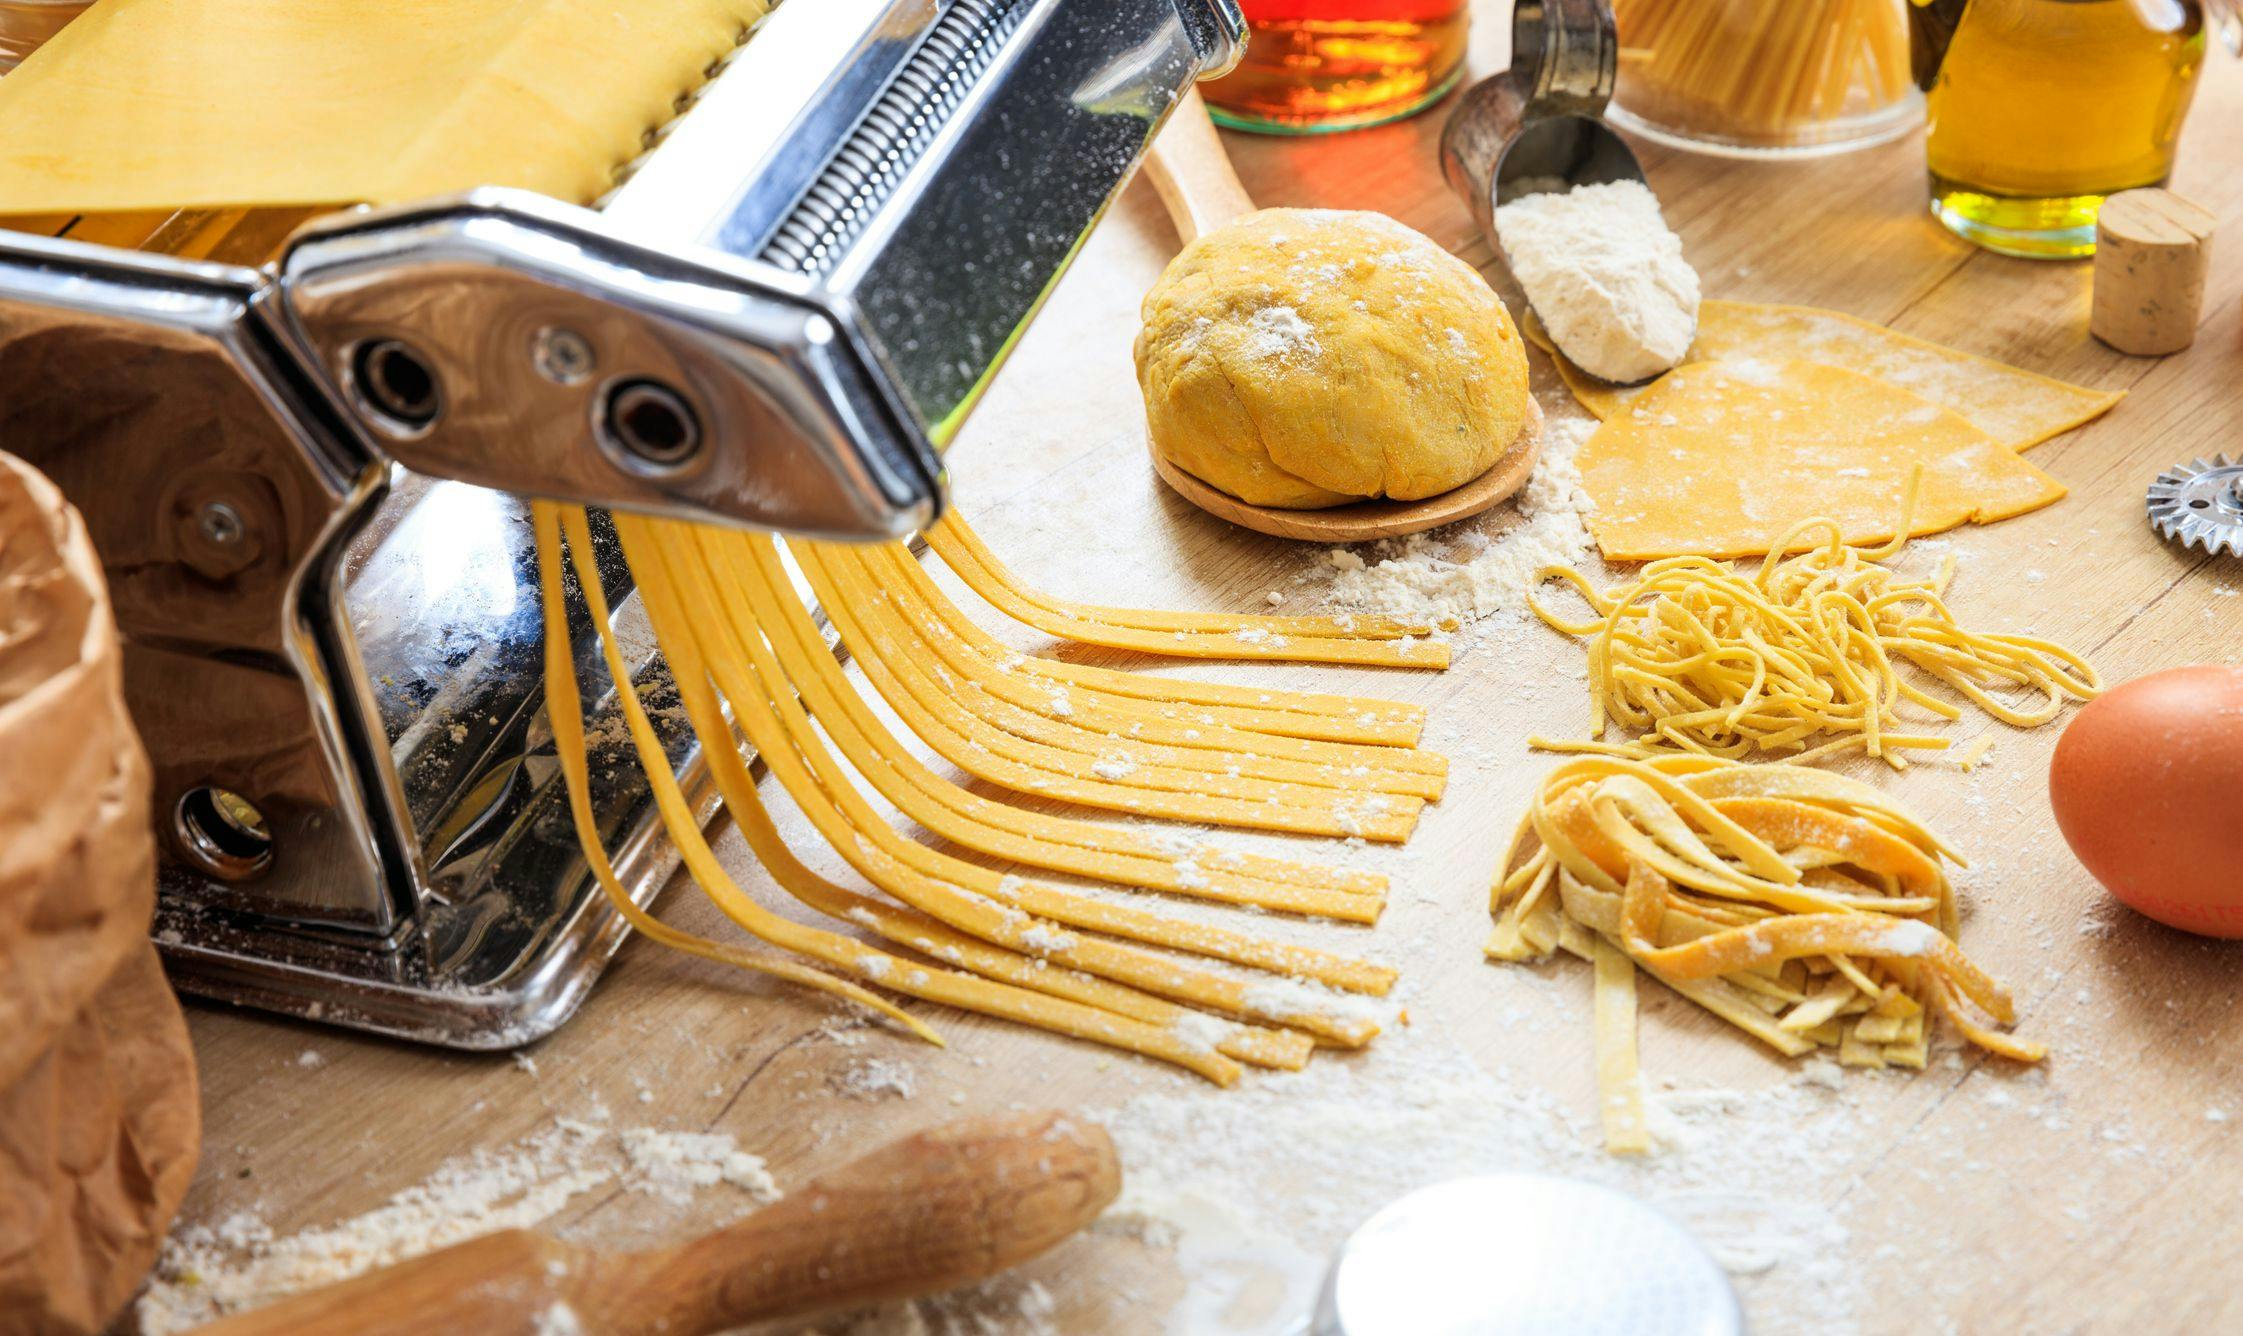 wayfair-pasta-maker-and-a-mess-in-the-kitchen